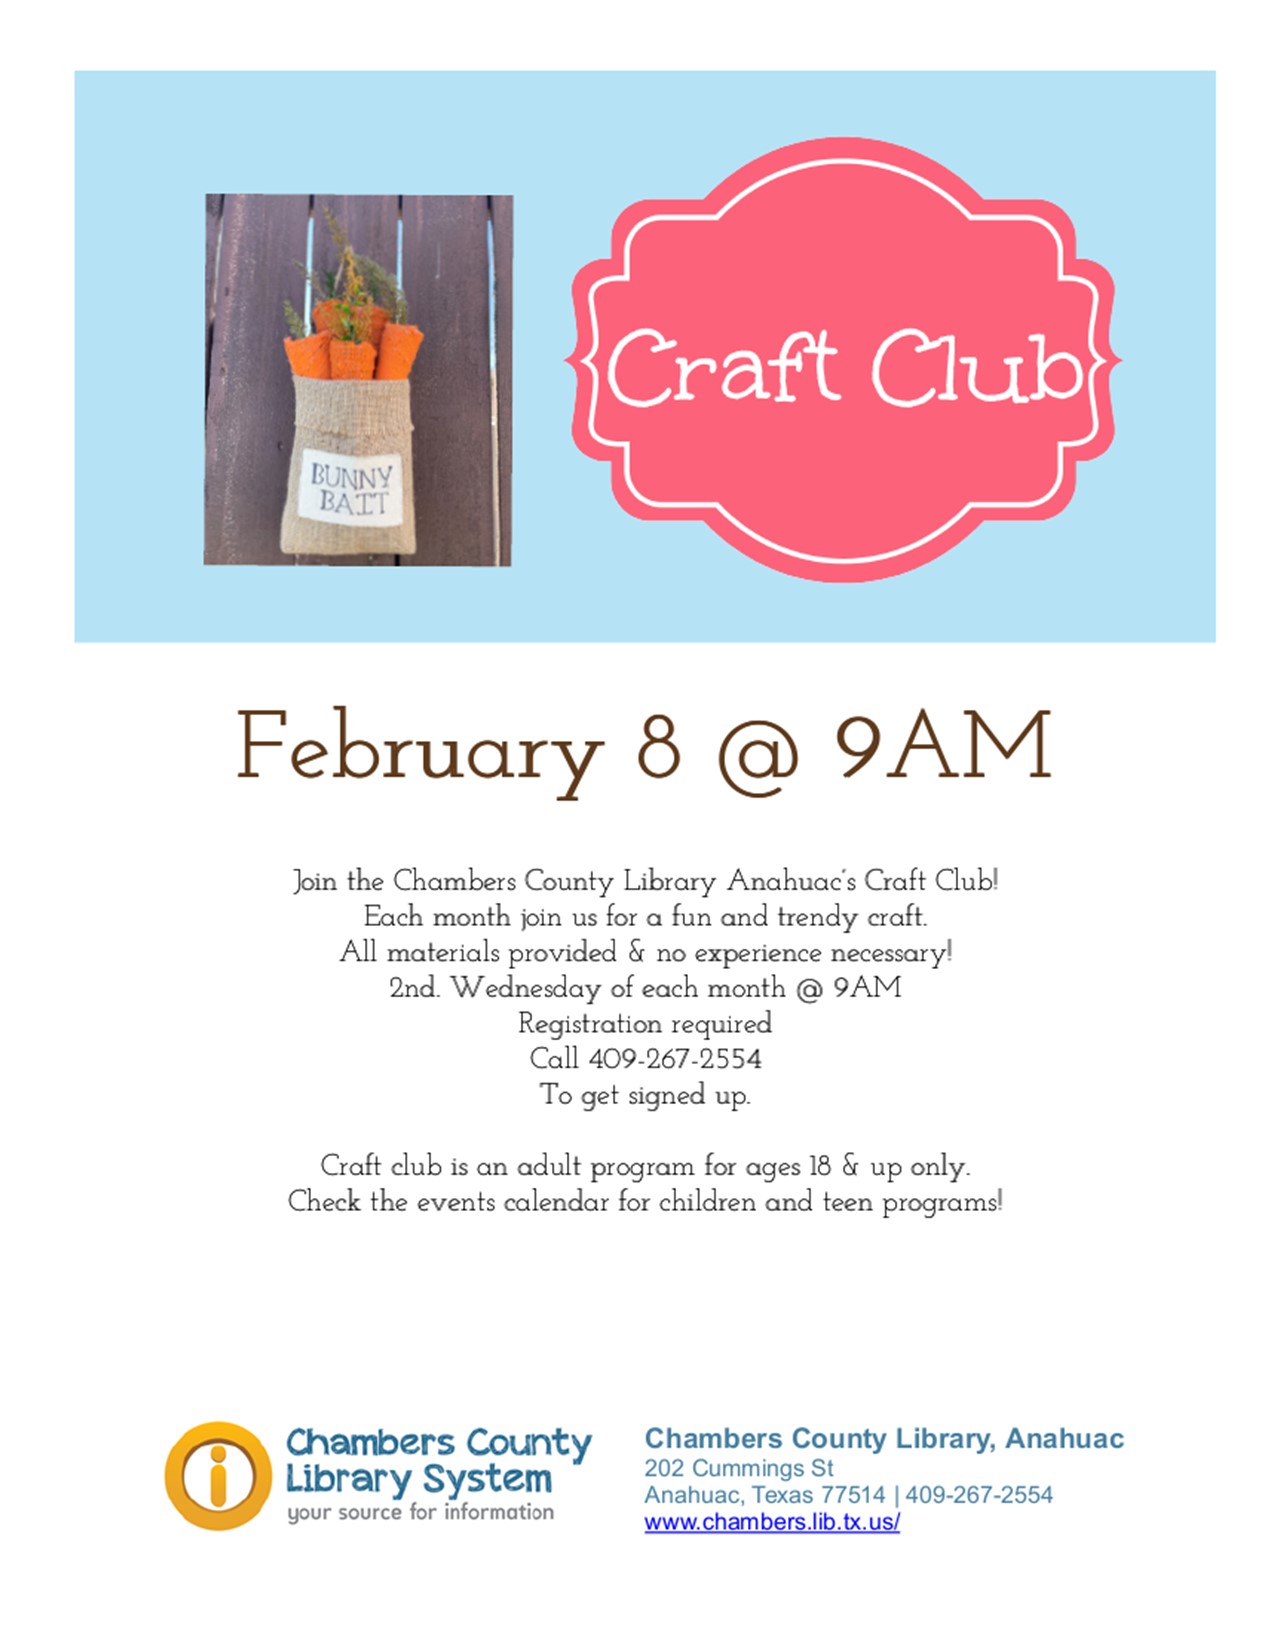 flyer with details about craft club